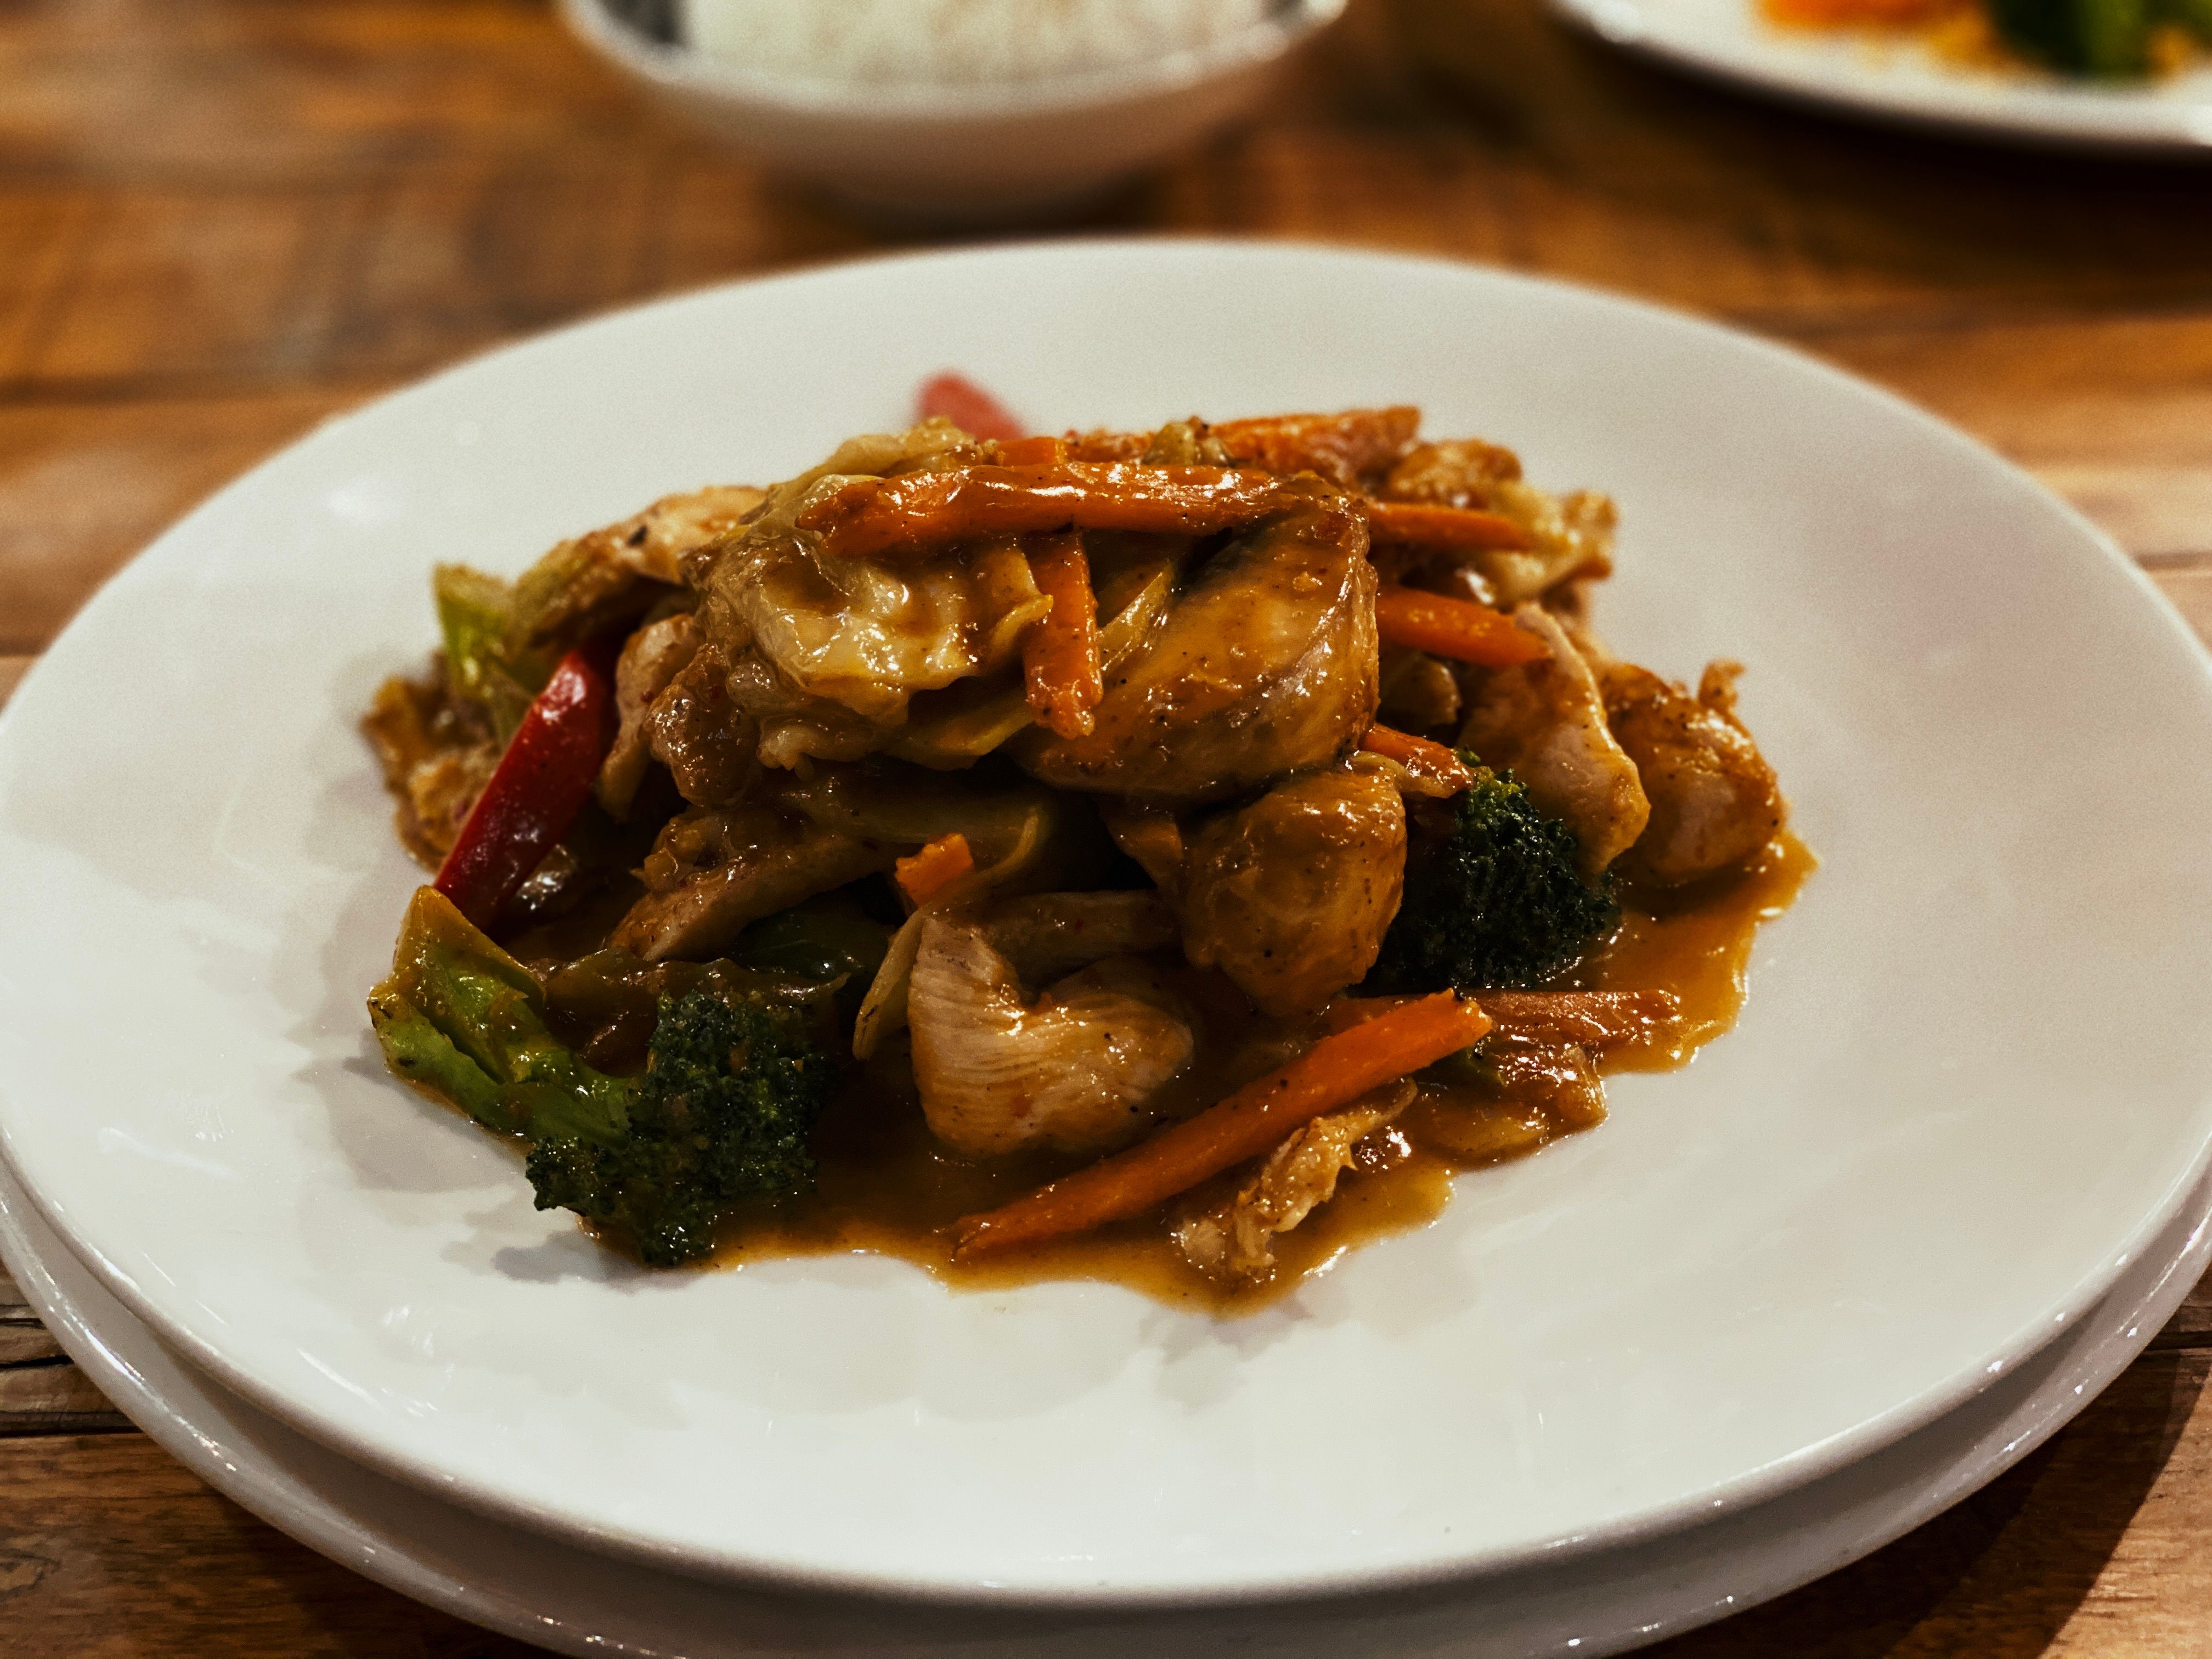 A photo of satay chicken with mixed vegetables on a plate.